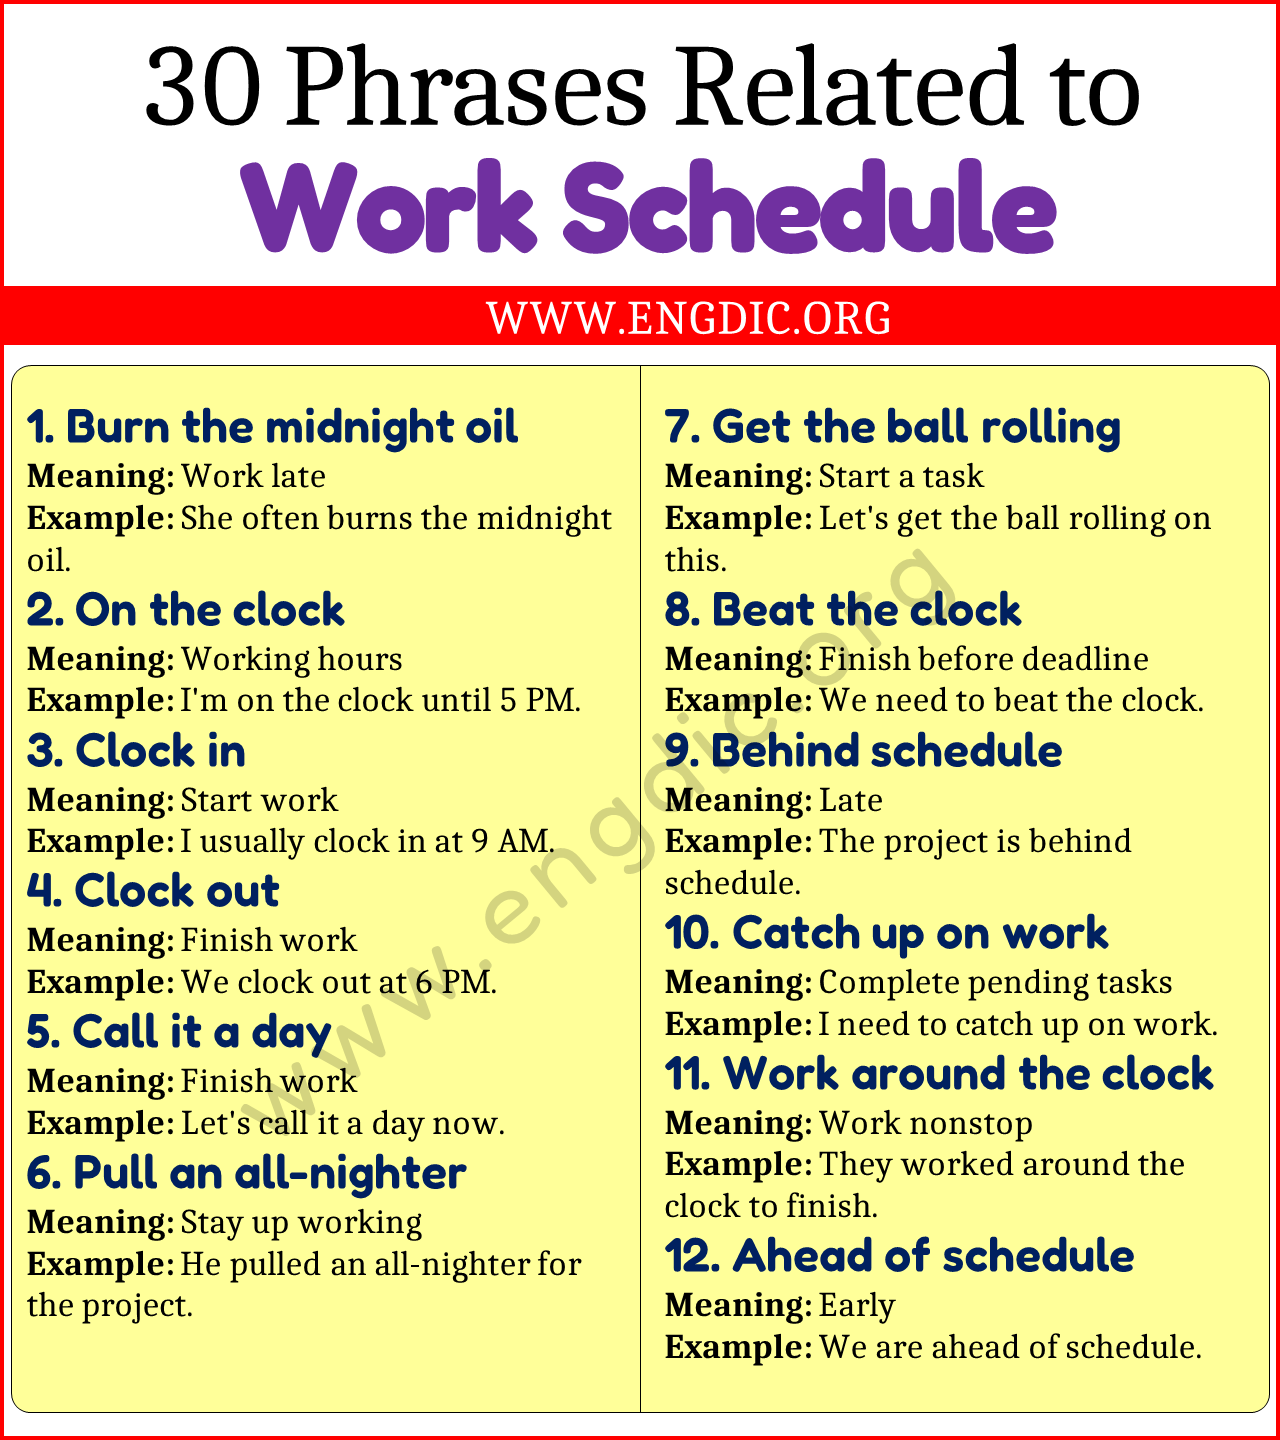 Phrases Related to Work Schedule